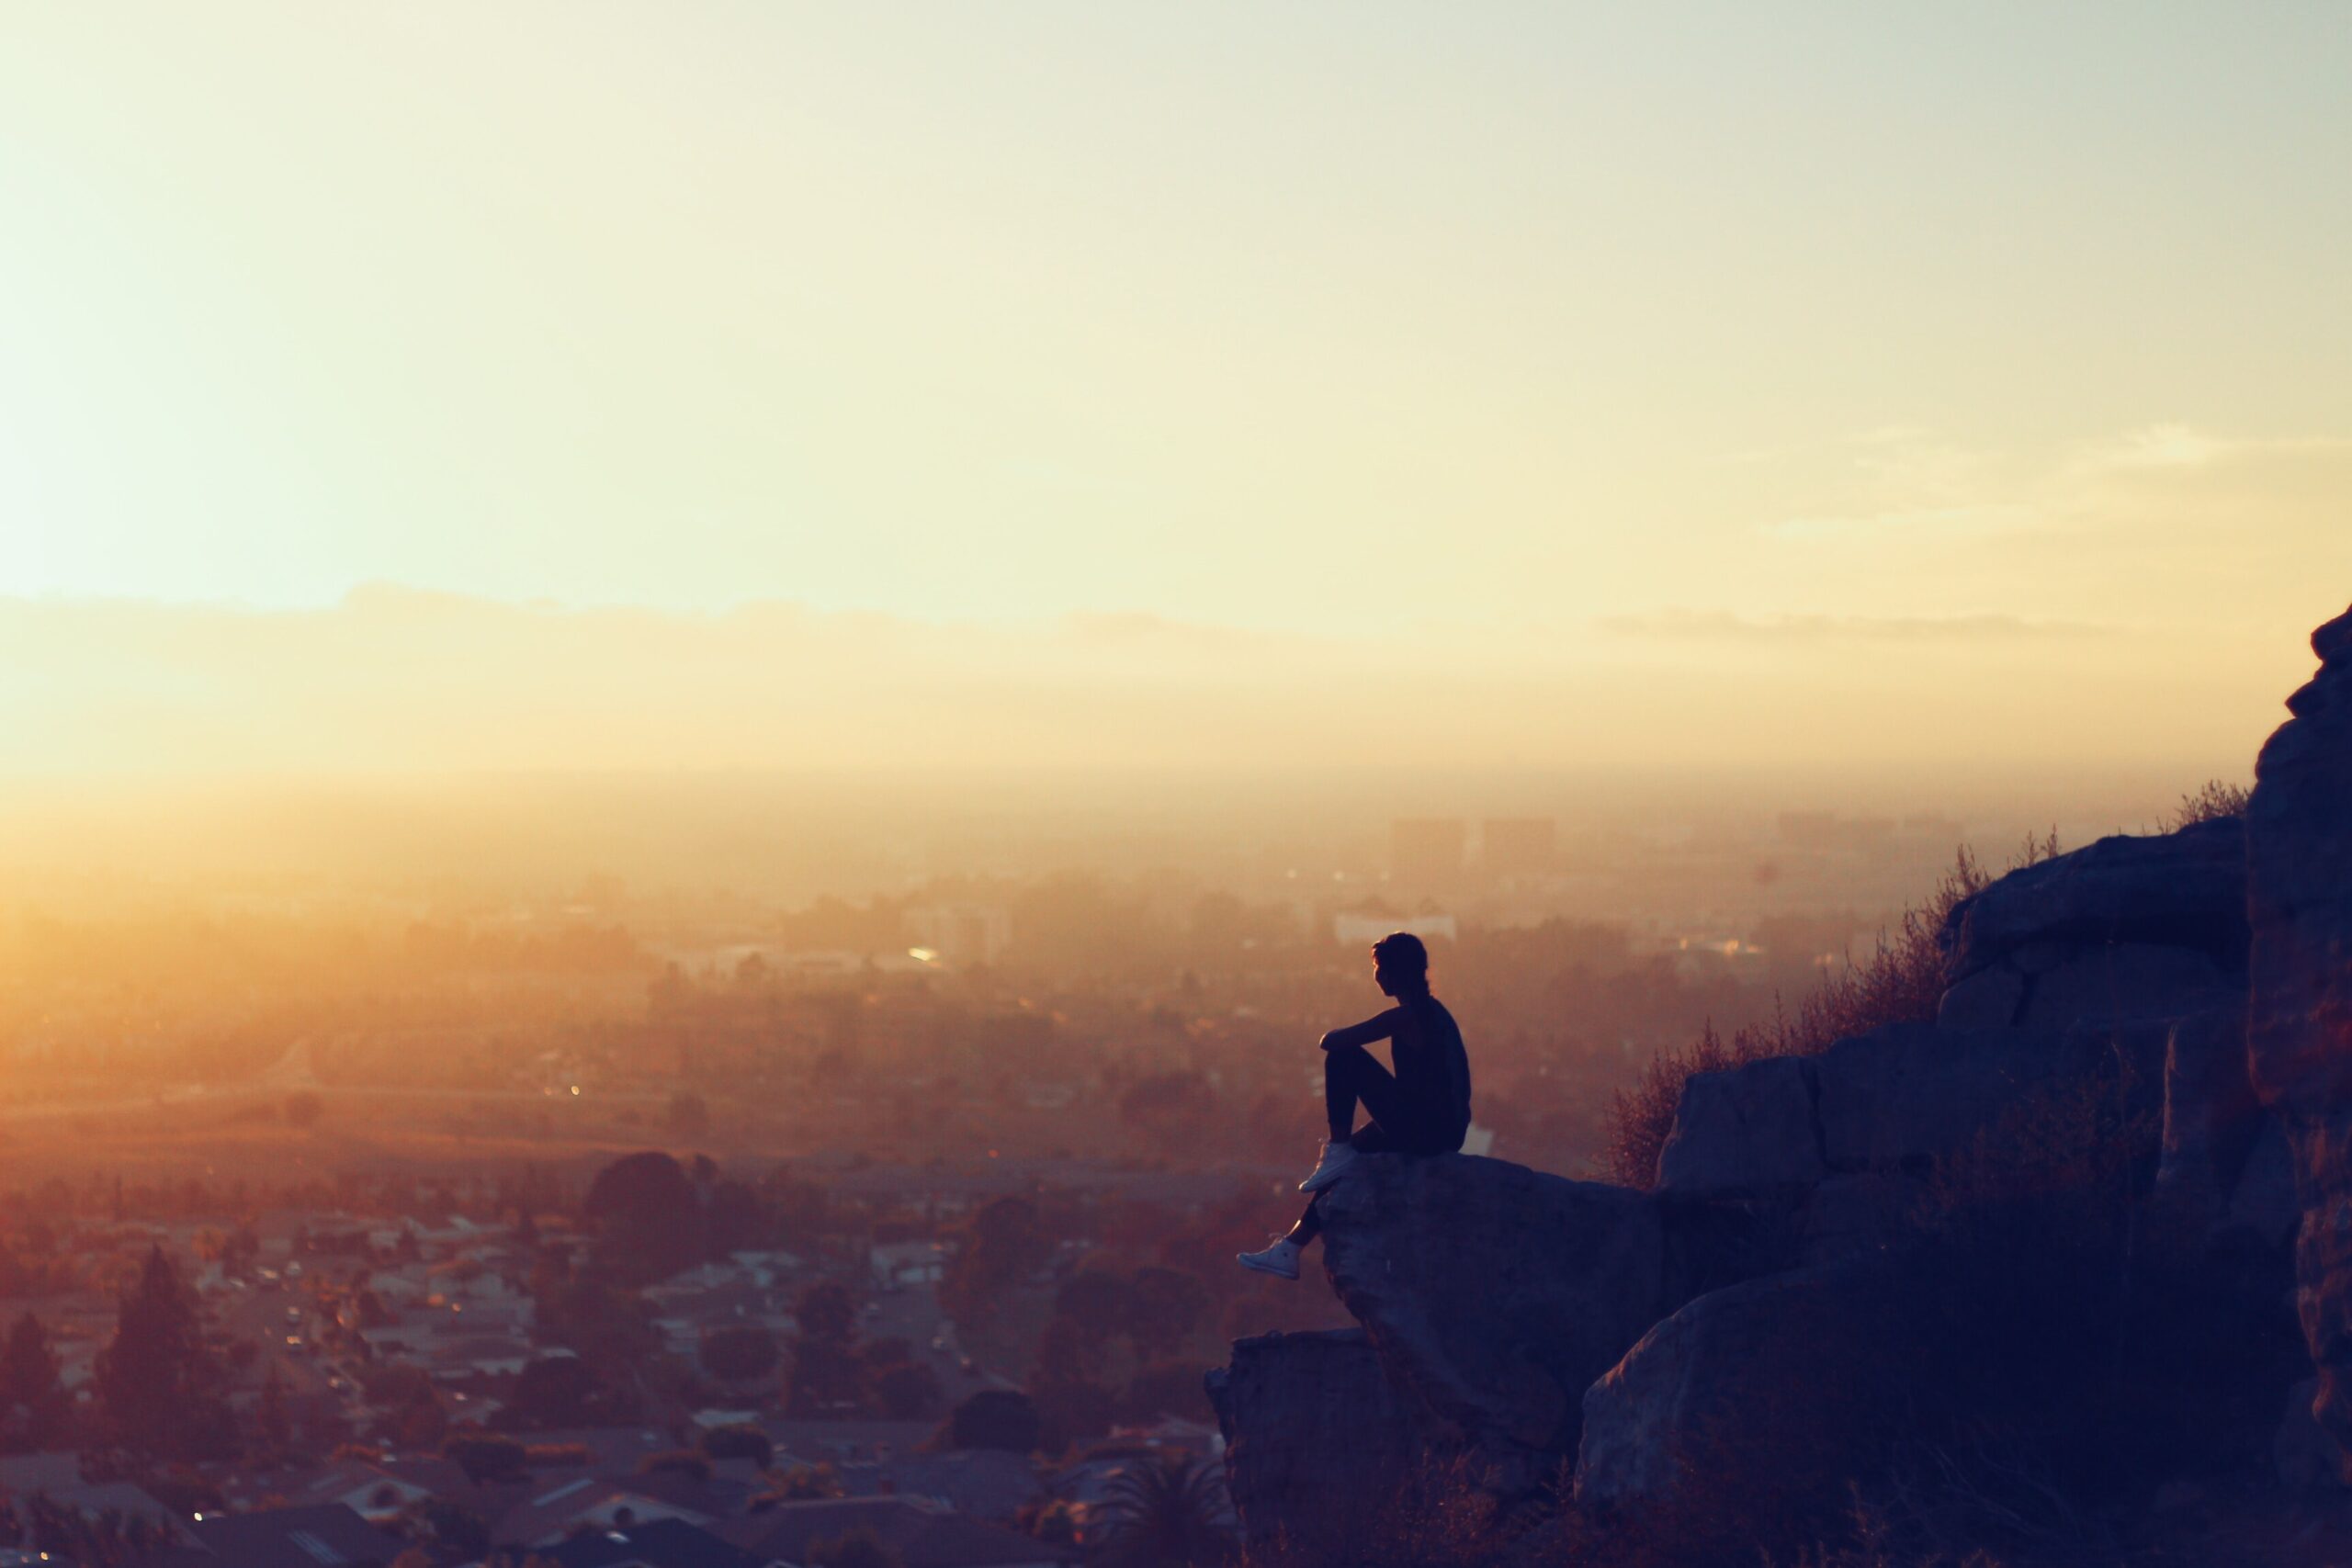 person overlooking the city from a mountain ledge